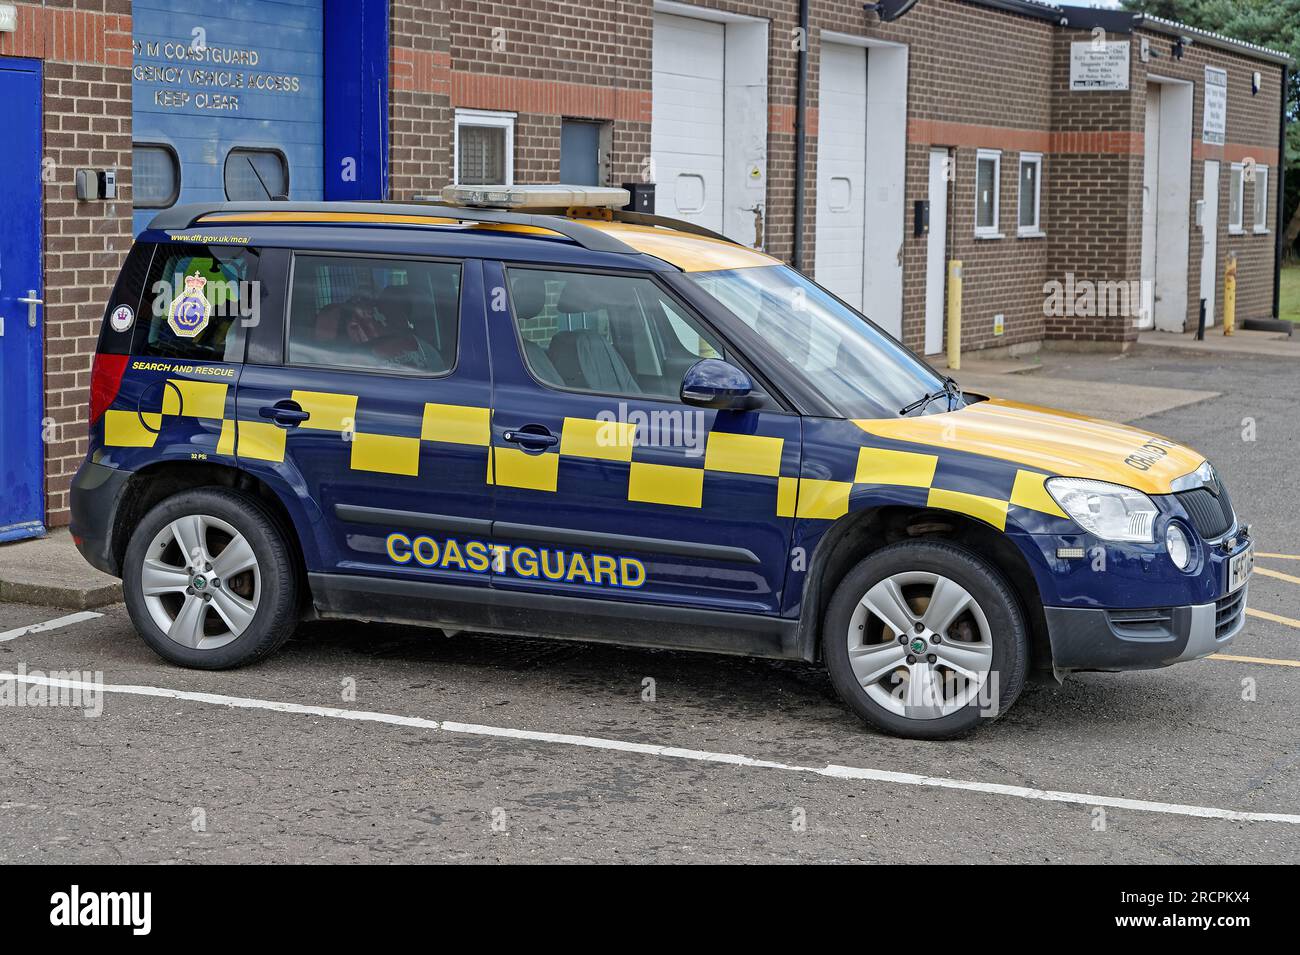 Coastguard Search & Rescue Vehicle based in the coastal town of Mablethorpe, Lincolnshire,UK Stock Photo